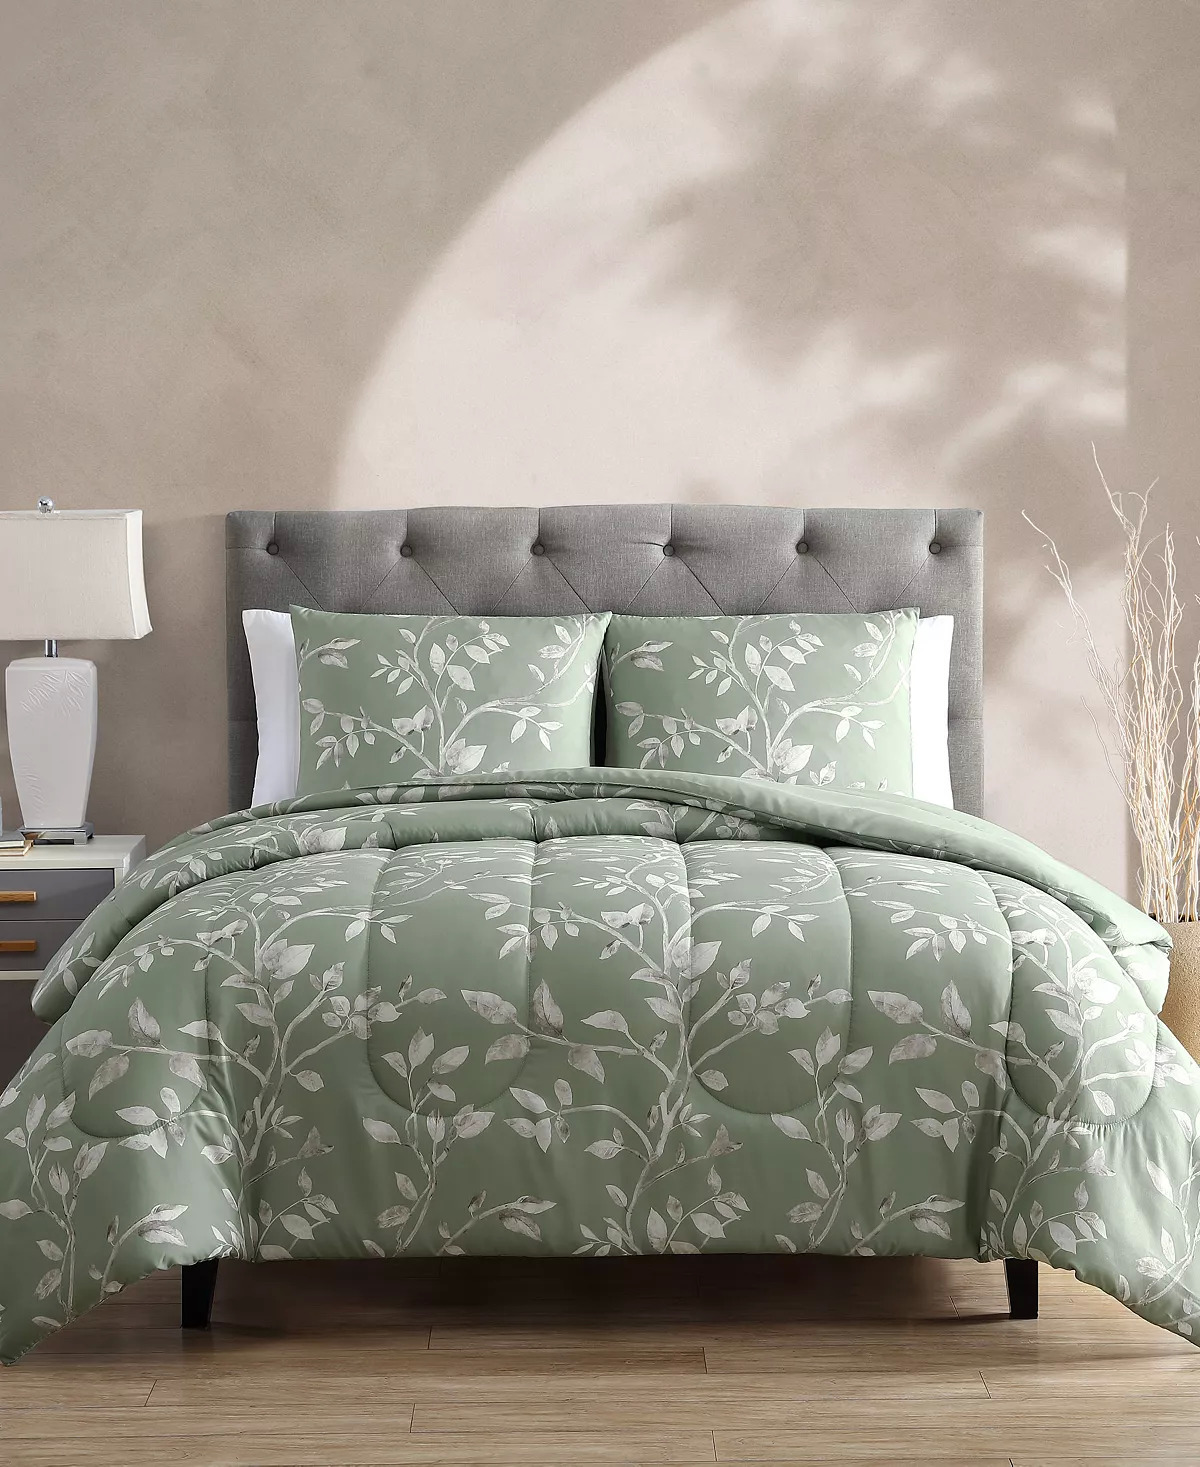 3-Piece Comforter Sets (Various Sizes & Colors): Sunham Colesville Floral/Solid $20, Hallmart Convertibles Wallis Set $20 & More + Free Store Pickup at Macy's or F/S on Orders $25+